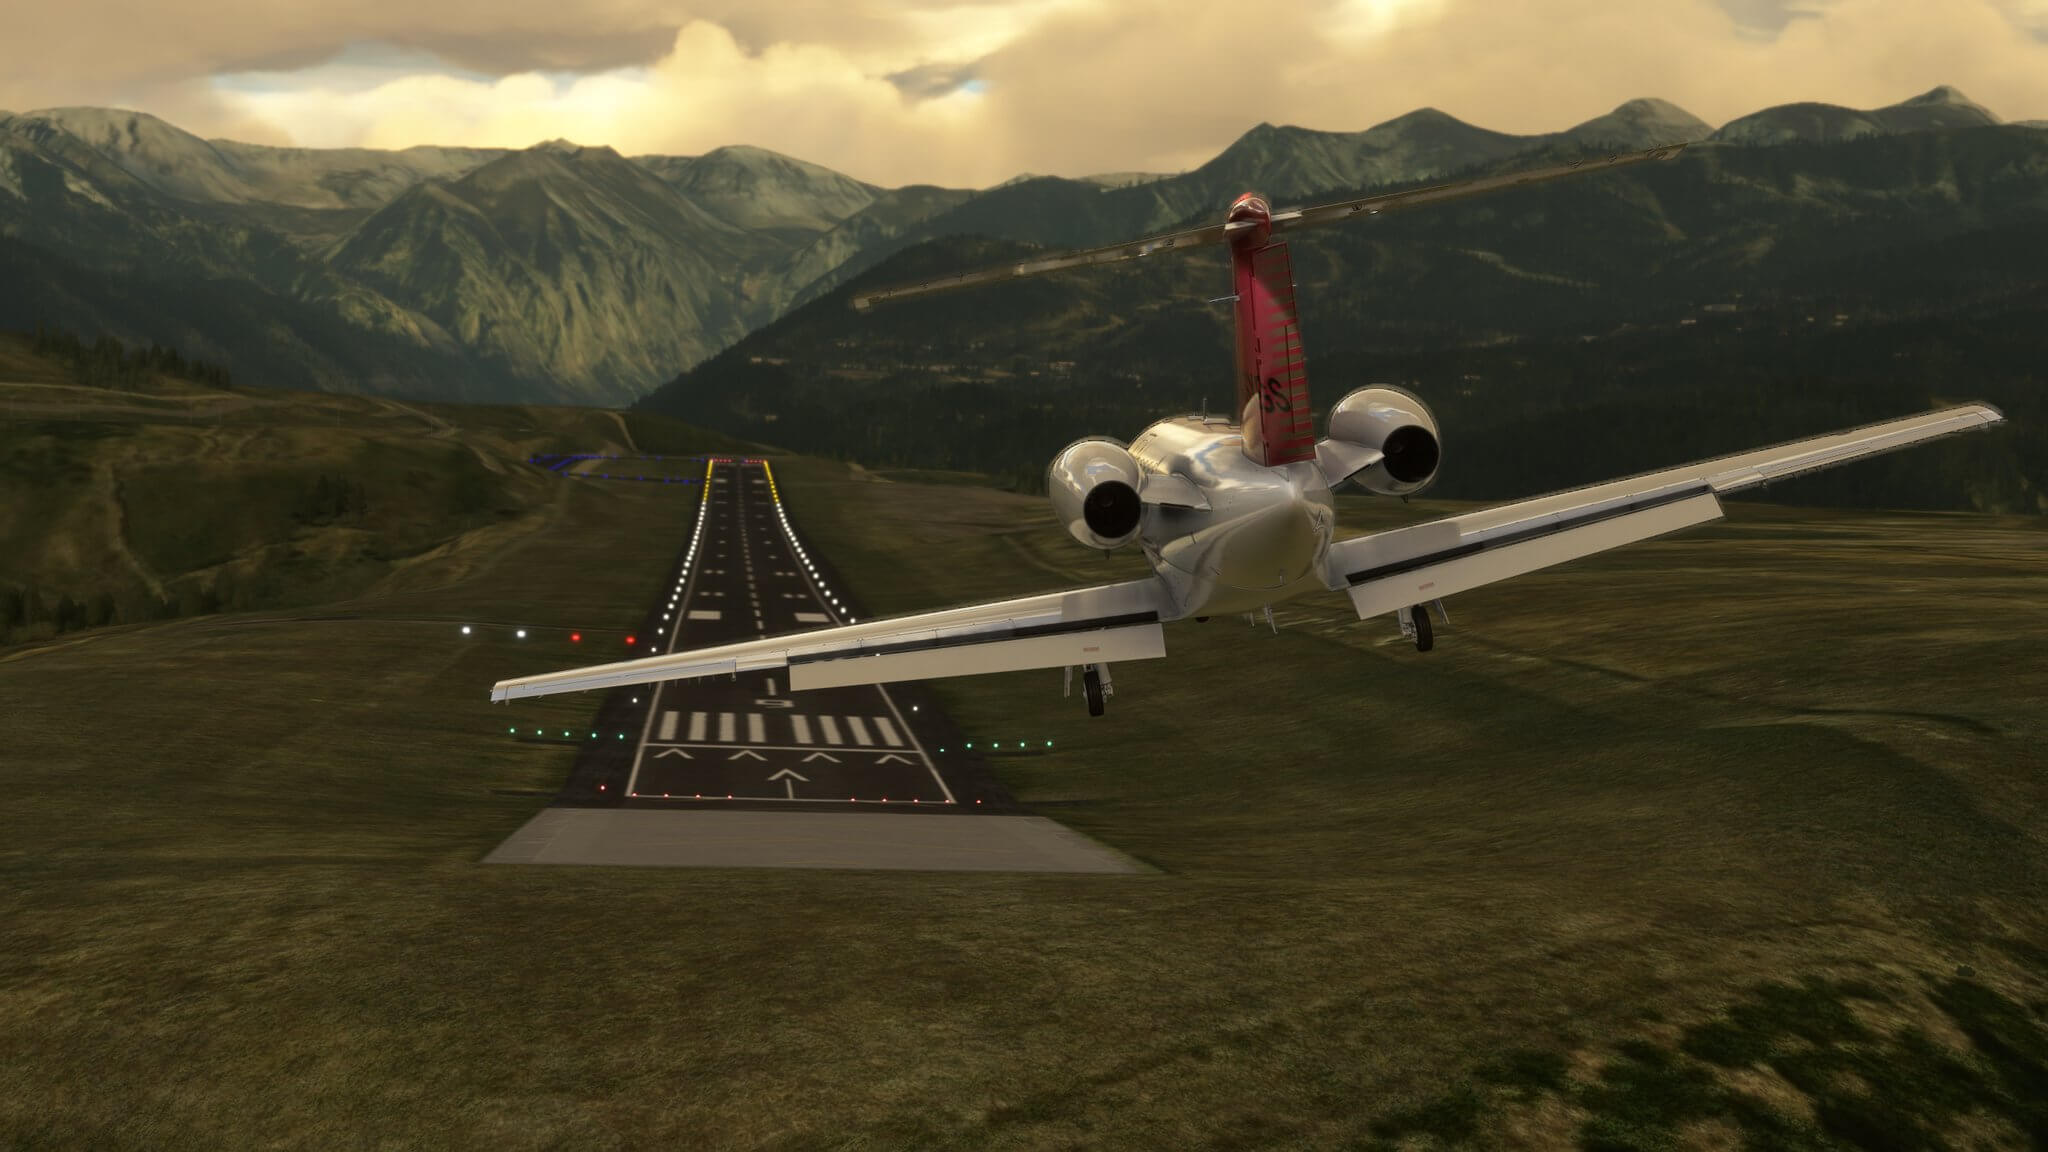 A Cessna Citation CJ4 banks left to line up with a sloped runway located in a valley.